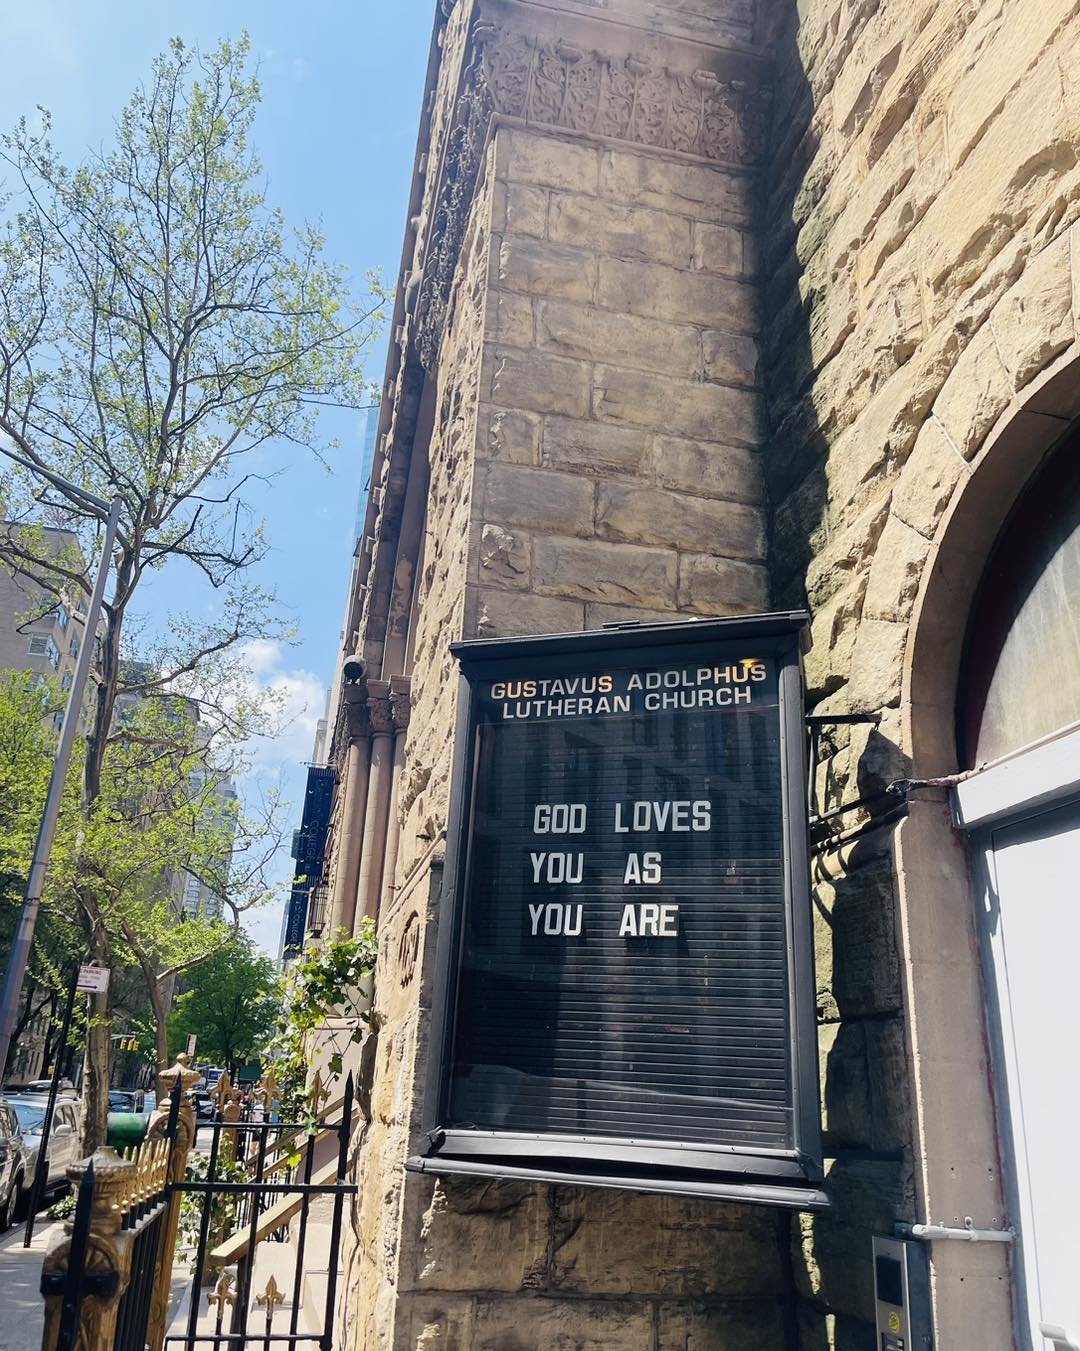 Happy Monday! Enjoy this beautiful day, and remember&hellip; you are so loved!

#church #elca #lutheran #nycchurch